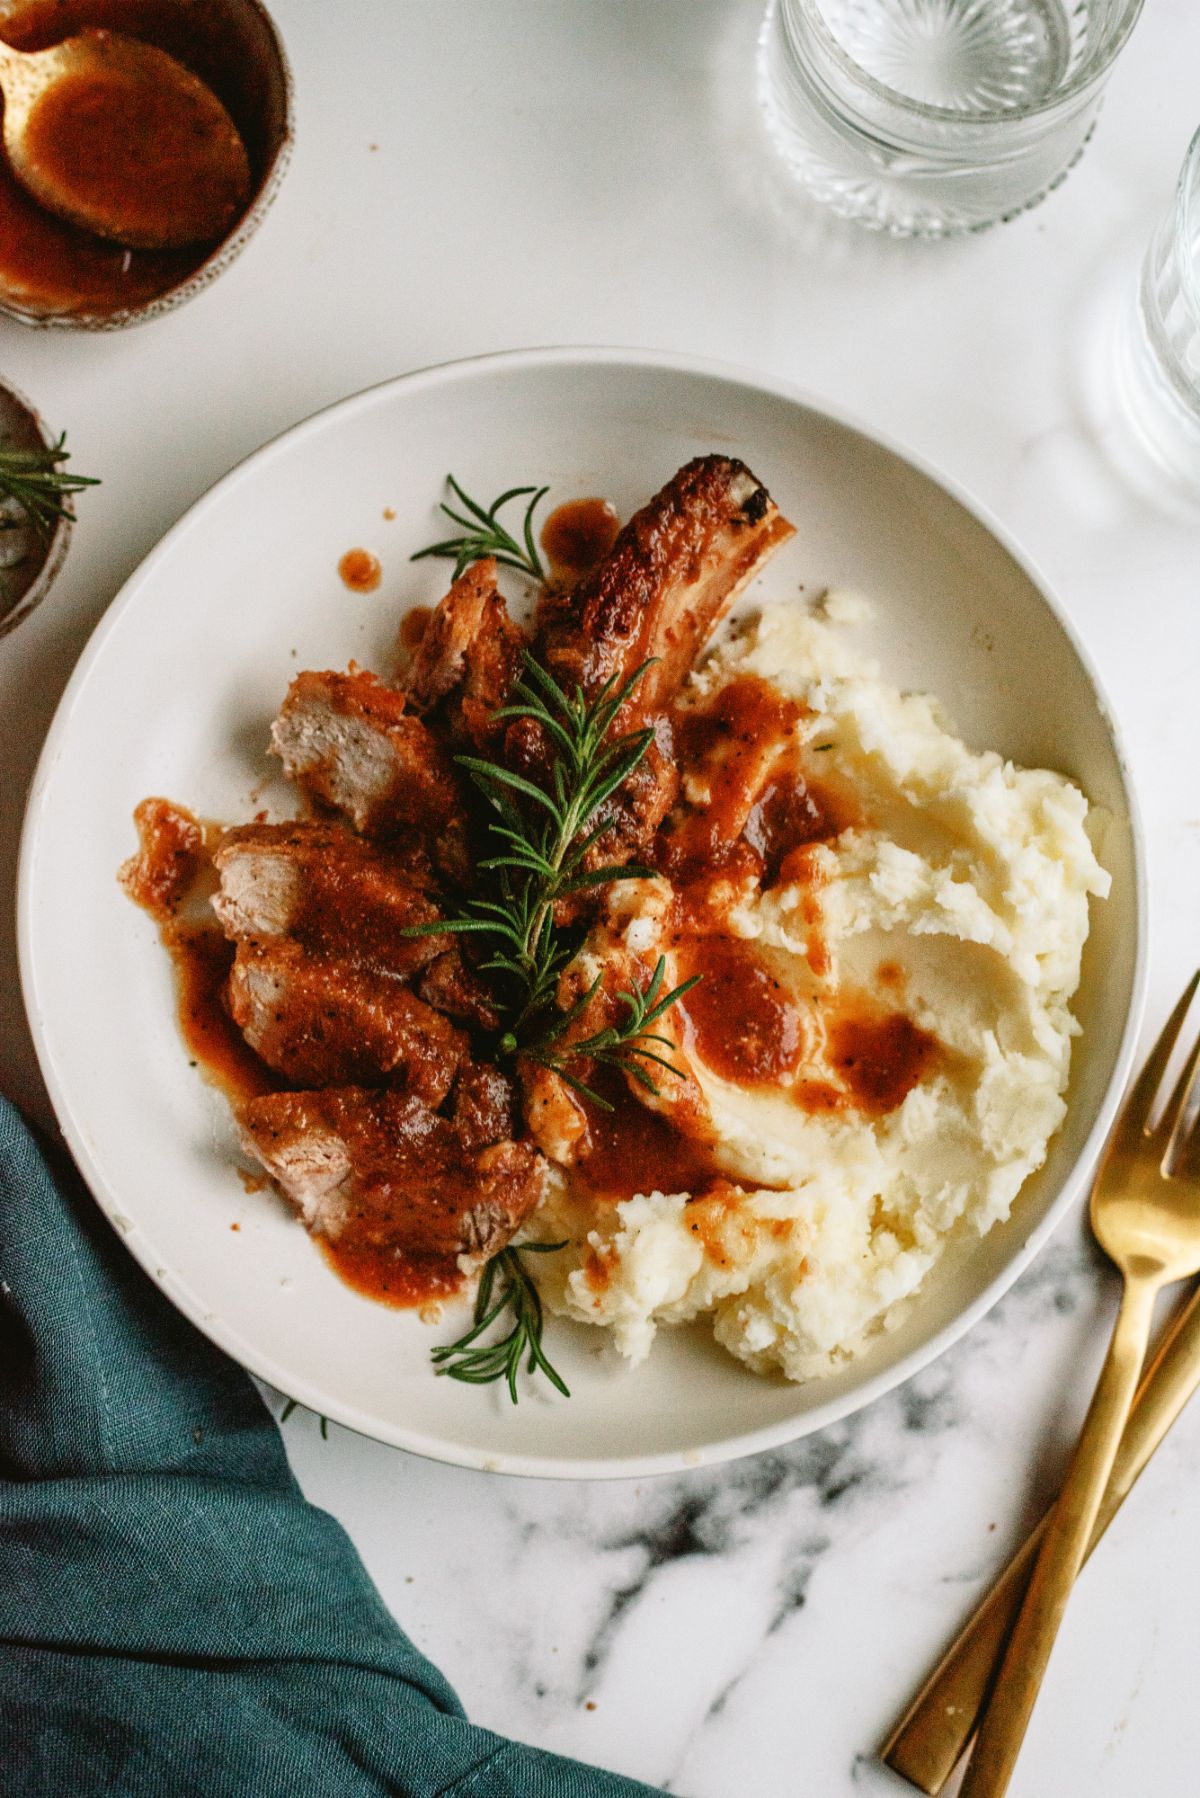 Instant Pot Cranberry Pork Chops sliced and served with mashed potatoes